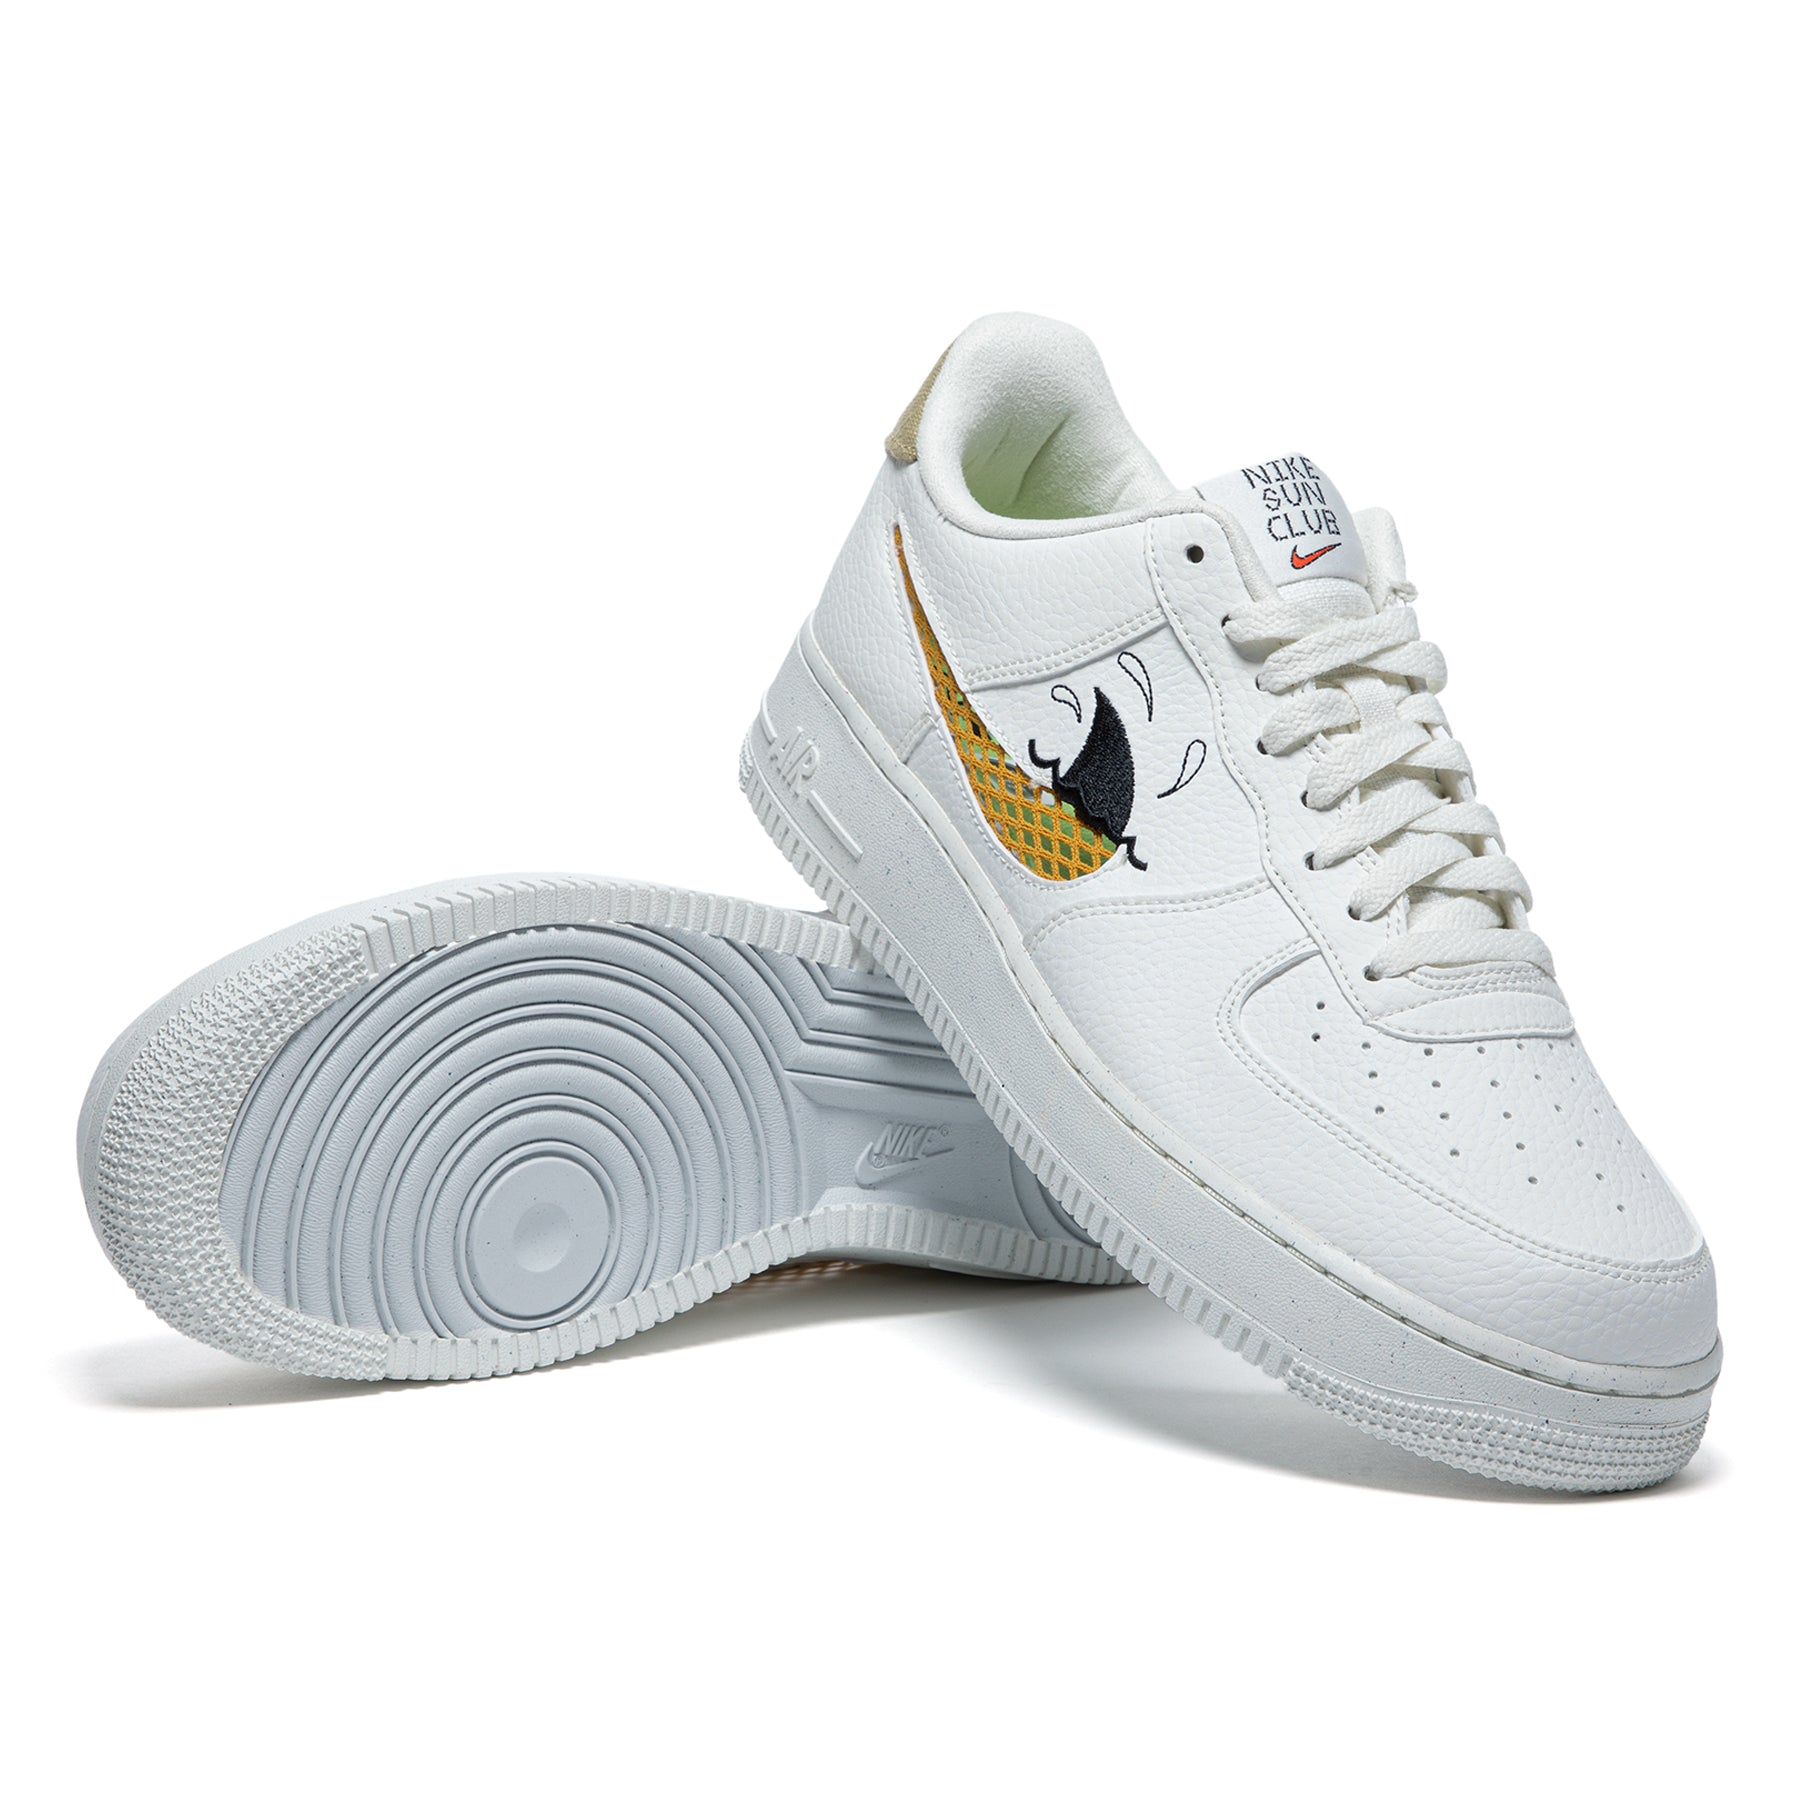 Nike Air Force 1 LV8 Sail & Sanded Gold, DQ7690-100